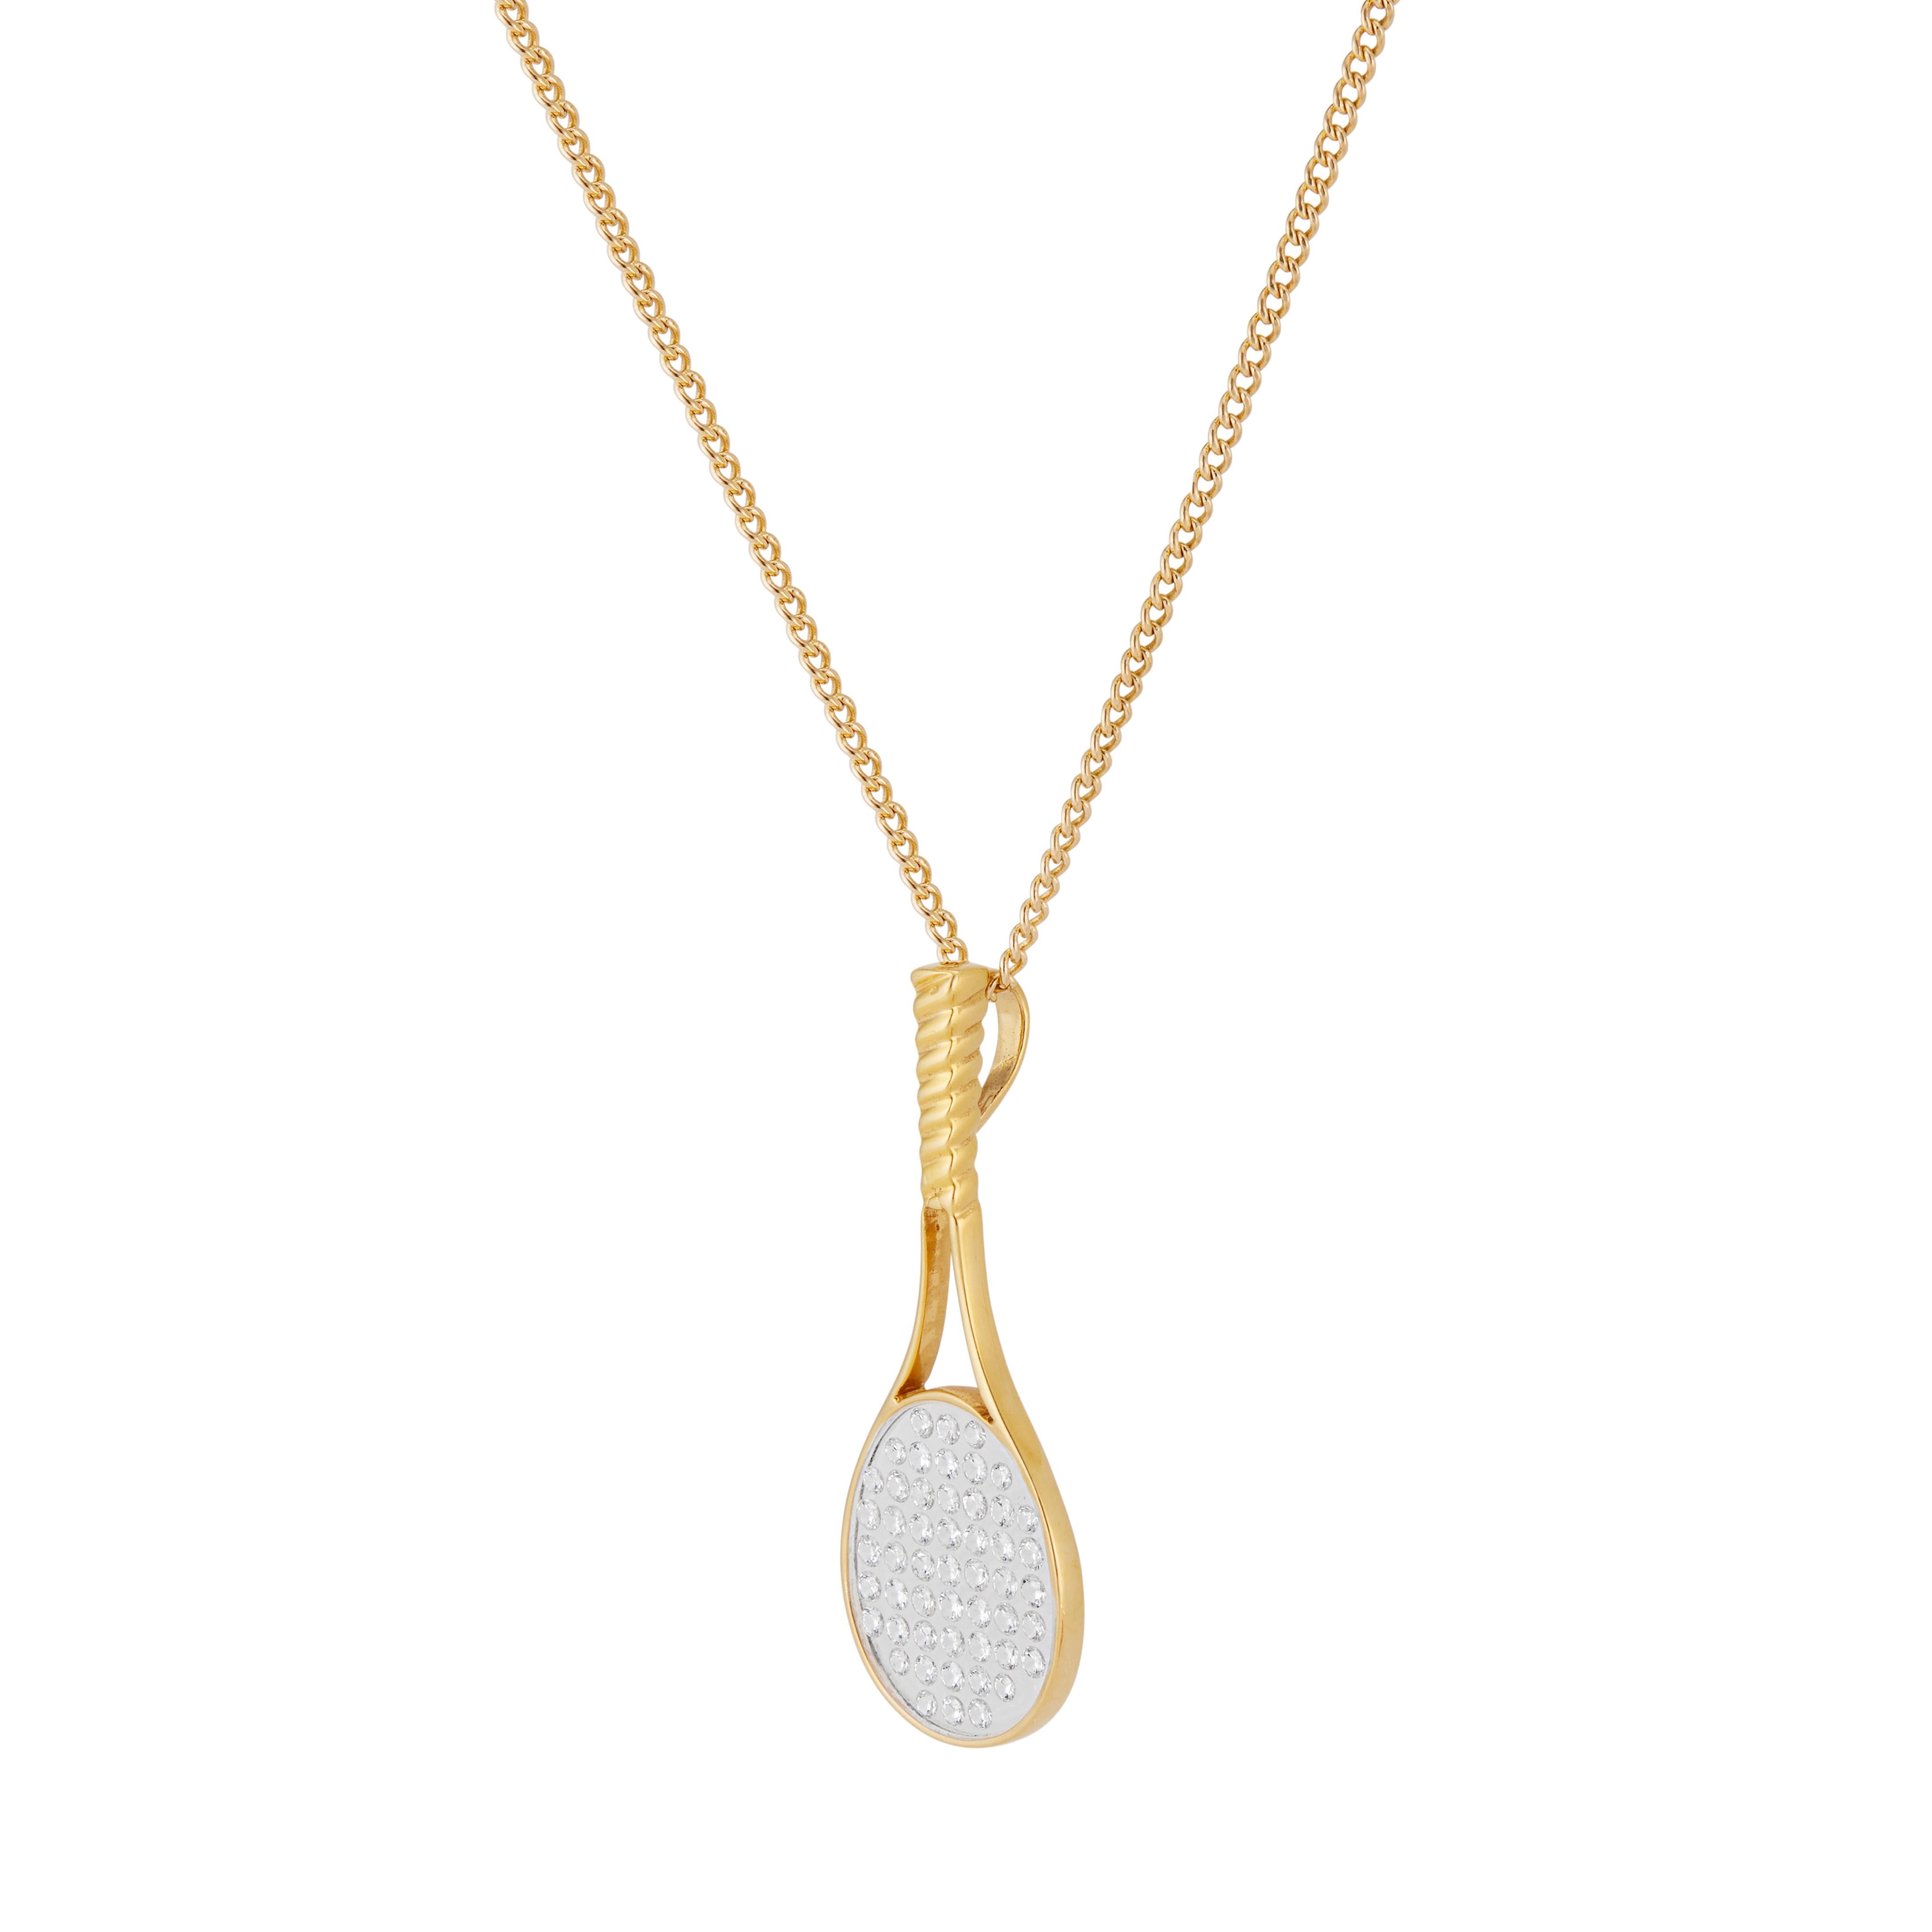 Designer CBI 18k yellow gold diamond tennis racket pendant necklace. 51 brilliant cut diamonds encased in clear Lucite in 18k yellow gold. 18 inches long. 

51 round brilliant cut diamonds, F-G SI approx. .50cts
18k yellow gold 
Stamped: 18k
4.8